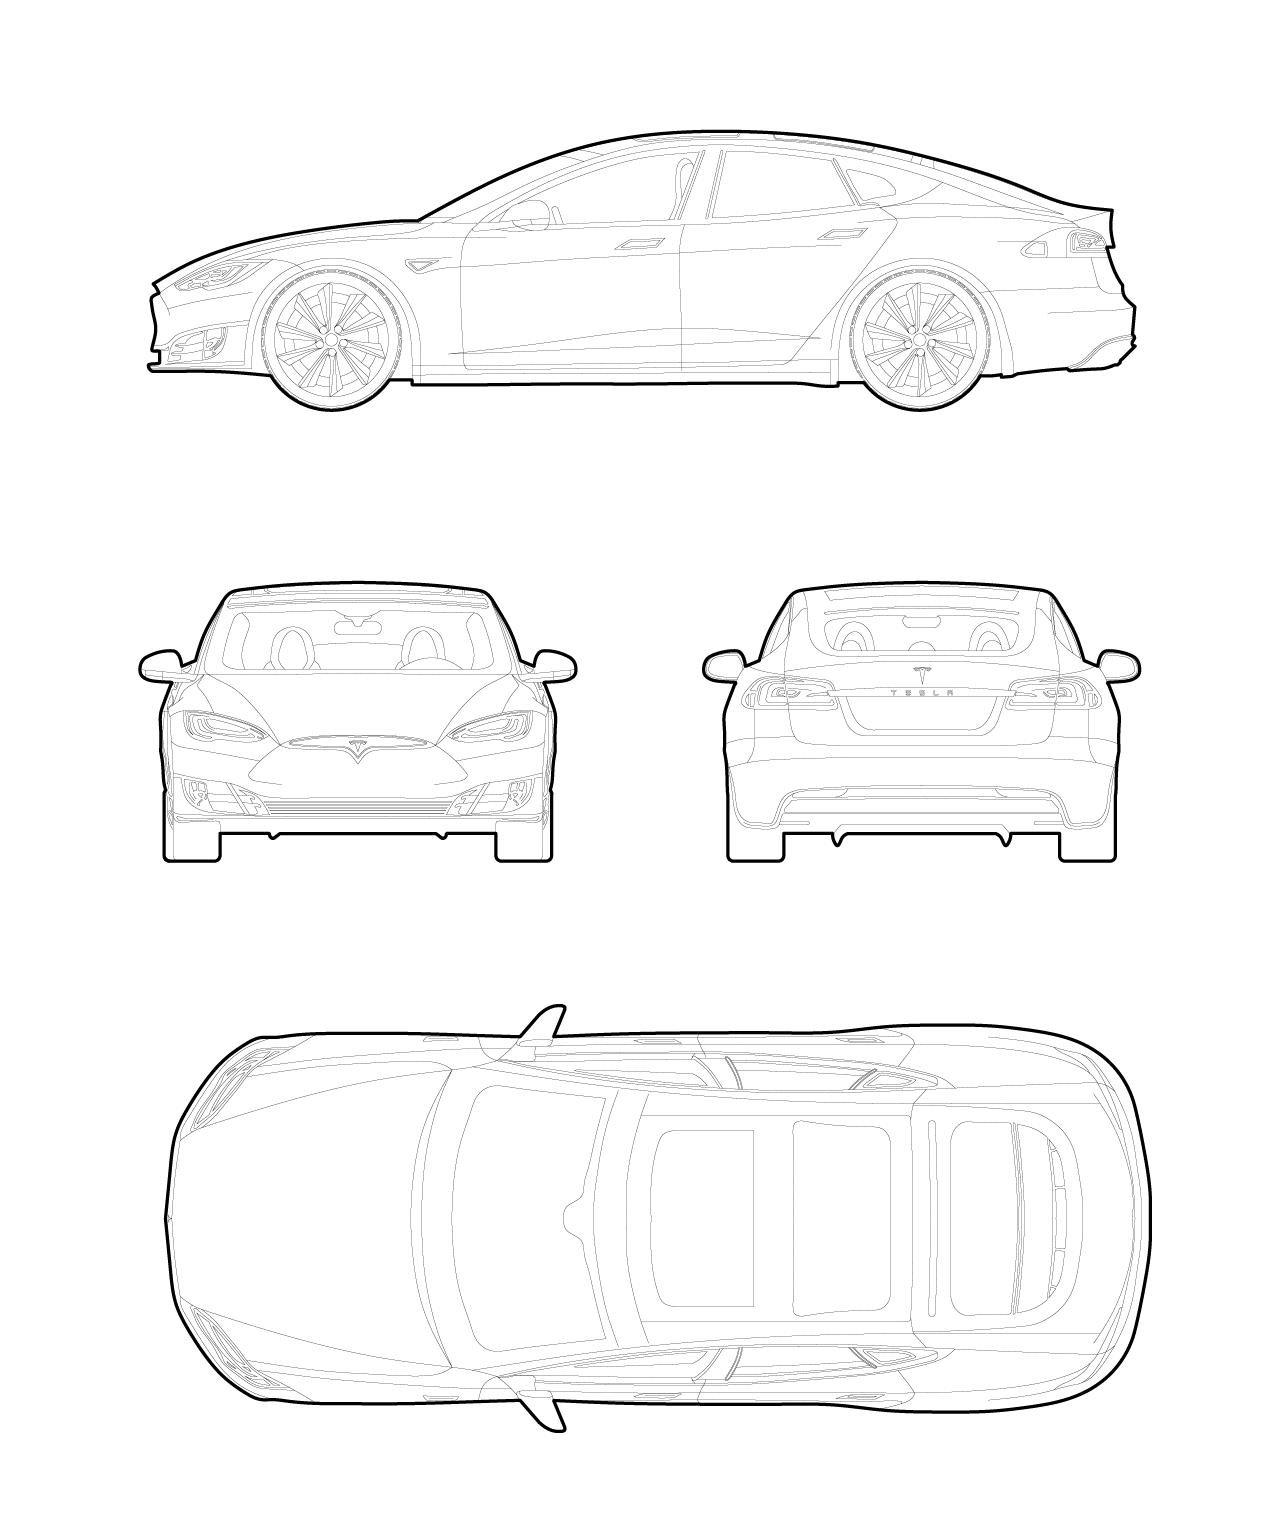 Drawing of a Tesla model S cars dwg